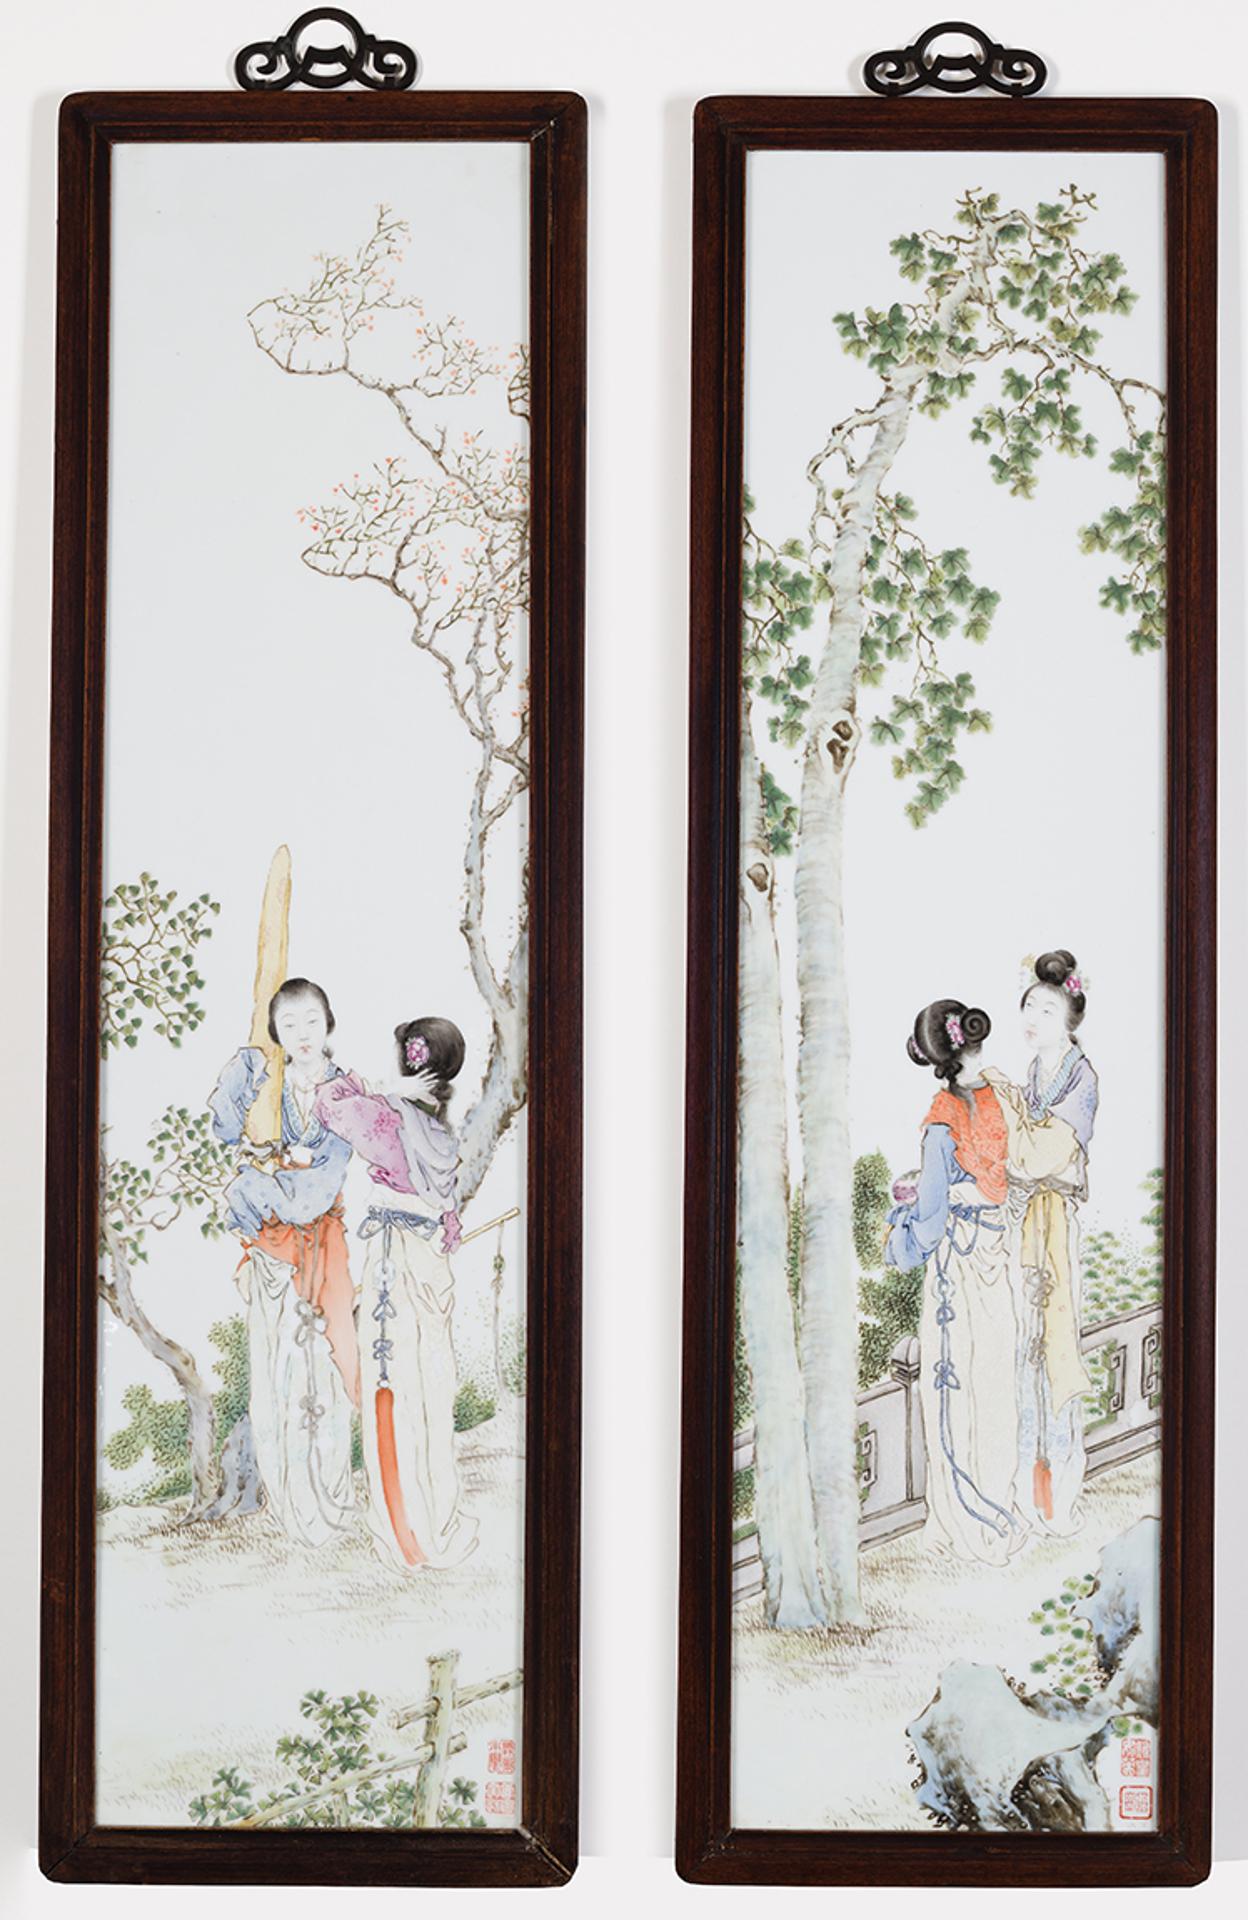 Chinese Art - A Rare Pair of Famille Rose Porcelain Figural Panels, by Wang Qi, c. 1920